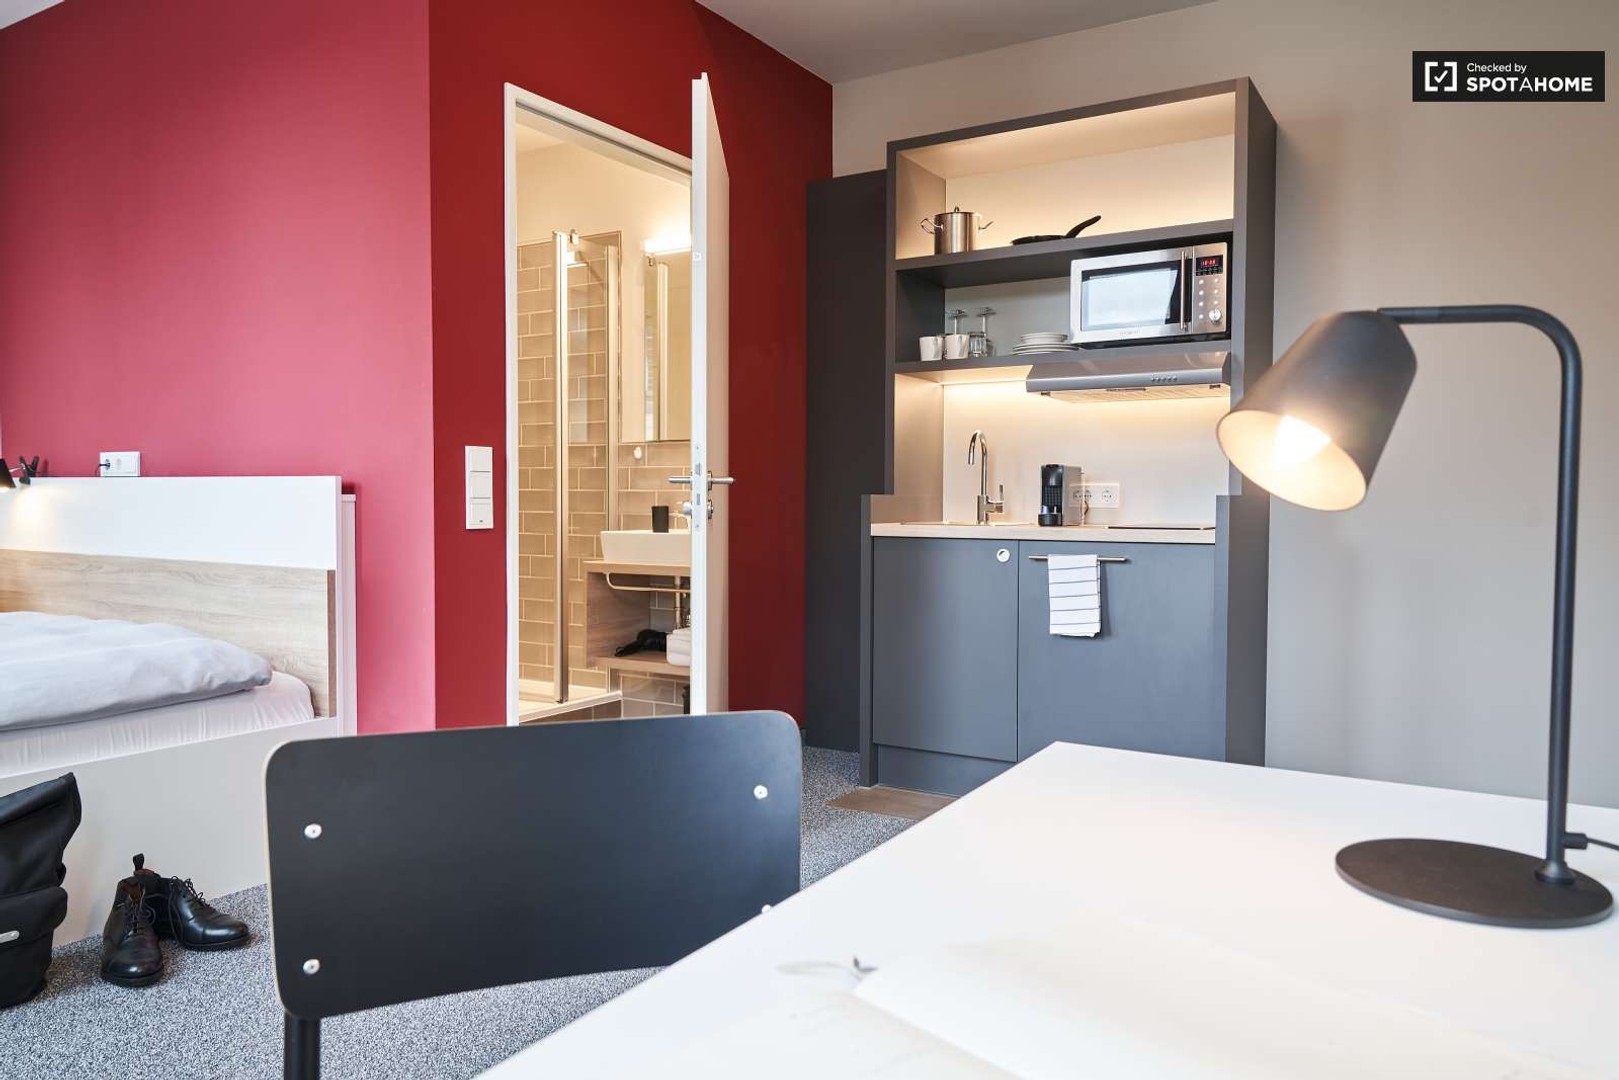 Accommodation in the centre of Hamburg